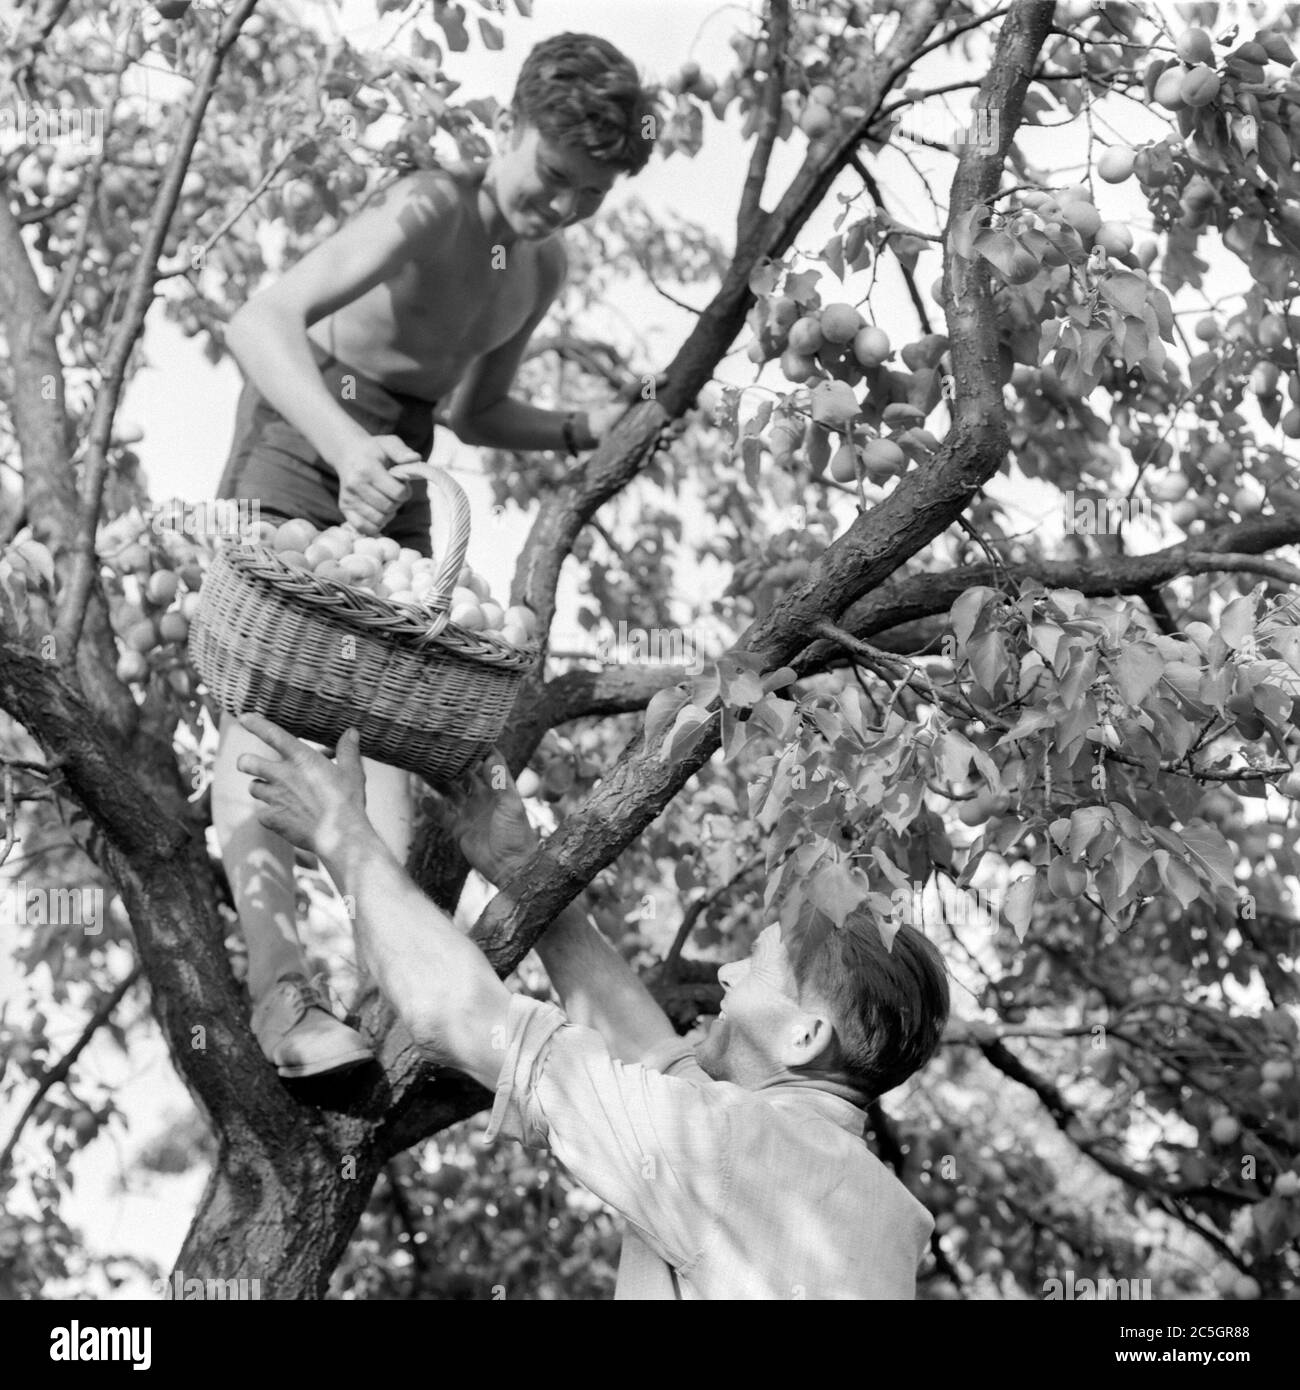 young boy in tree collecting peaches in wicker basket to hand down to older man on ground 1960s hungary Stock Photo